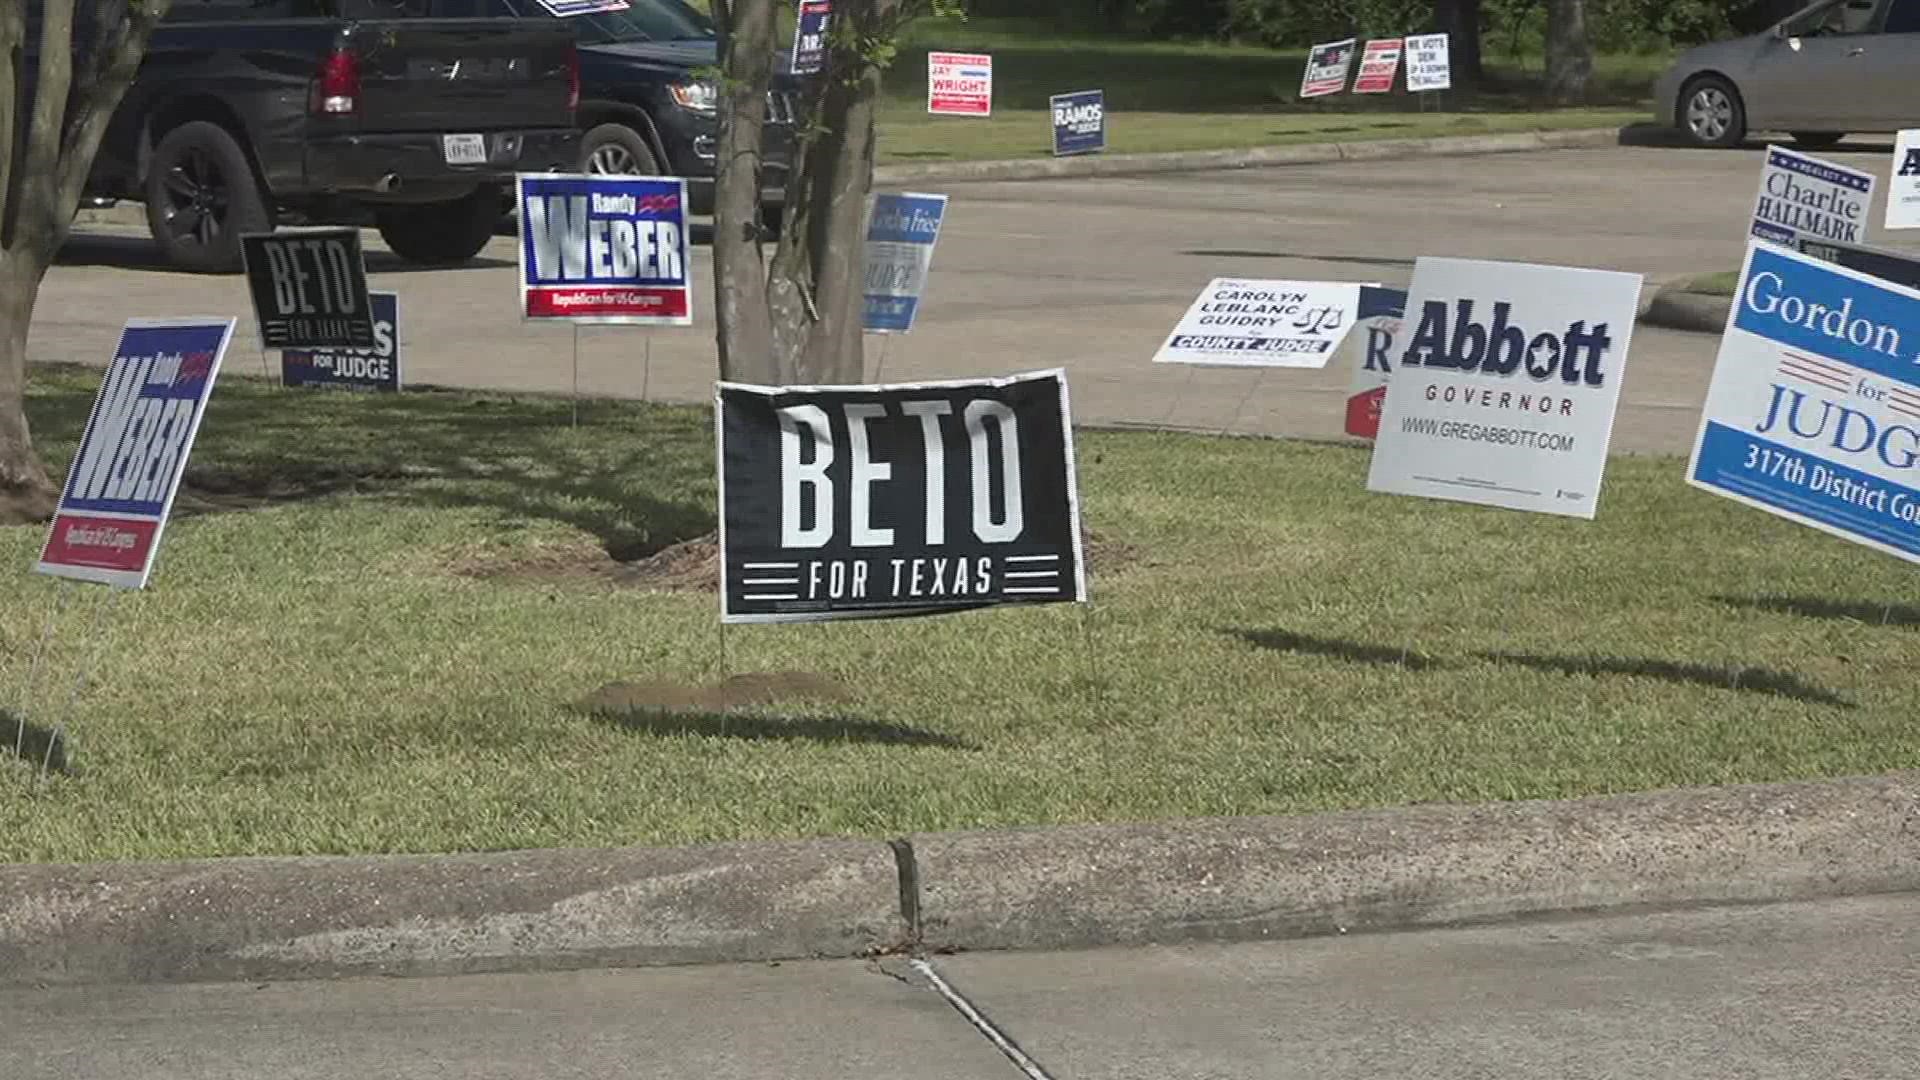 From the race for Texas governor to the race for Jefferson County judge, the 2022 ballots are filled with hot button area-level and state-level races.